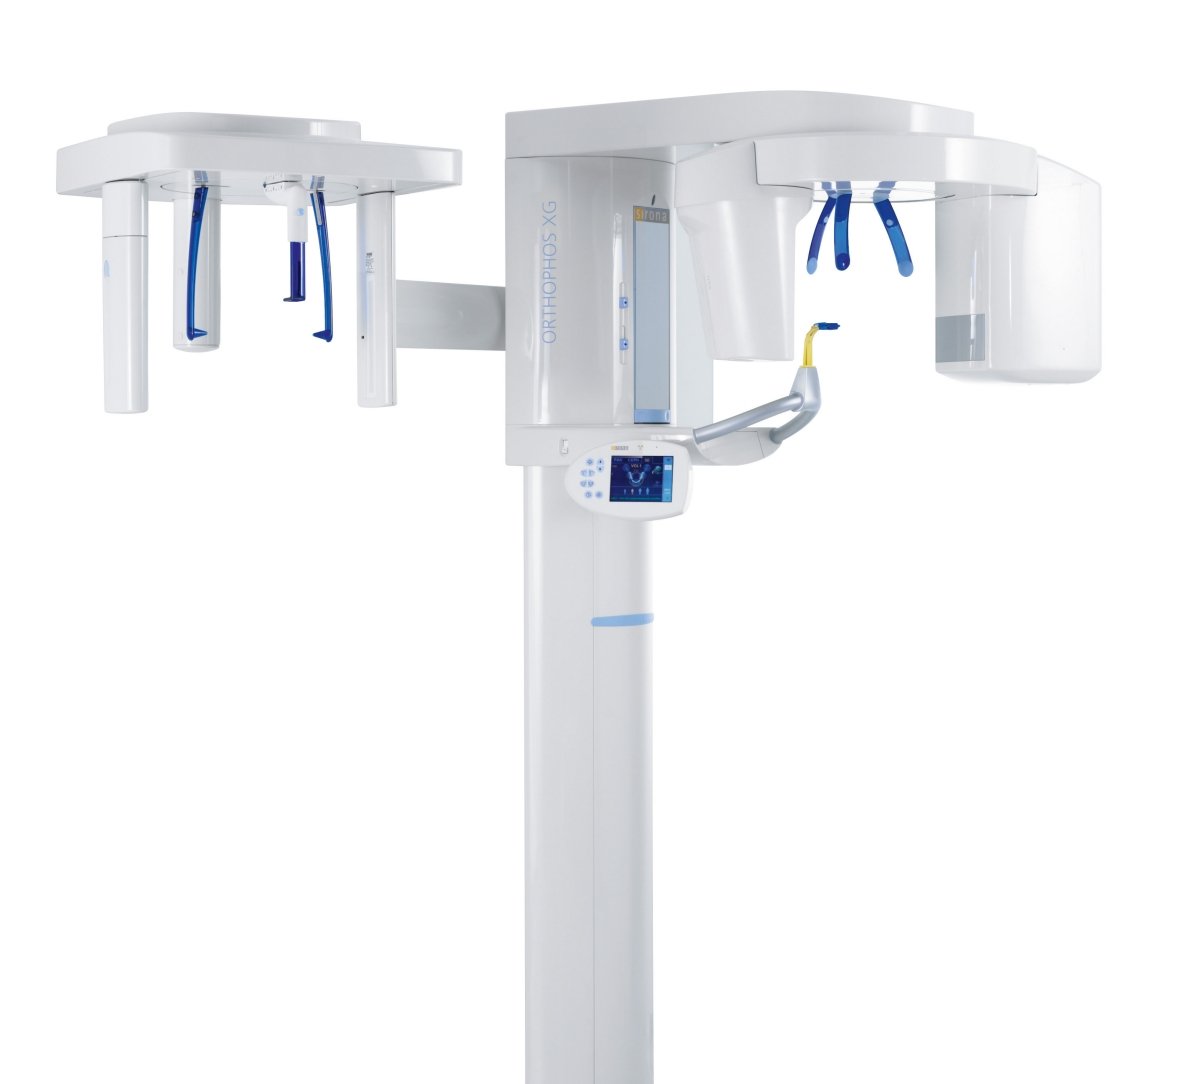 ORTHOPHOS XG: leading panoramic unit now offers the optimum view in 2D and 3D